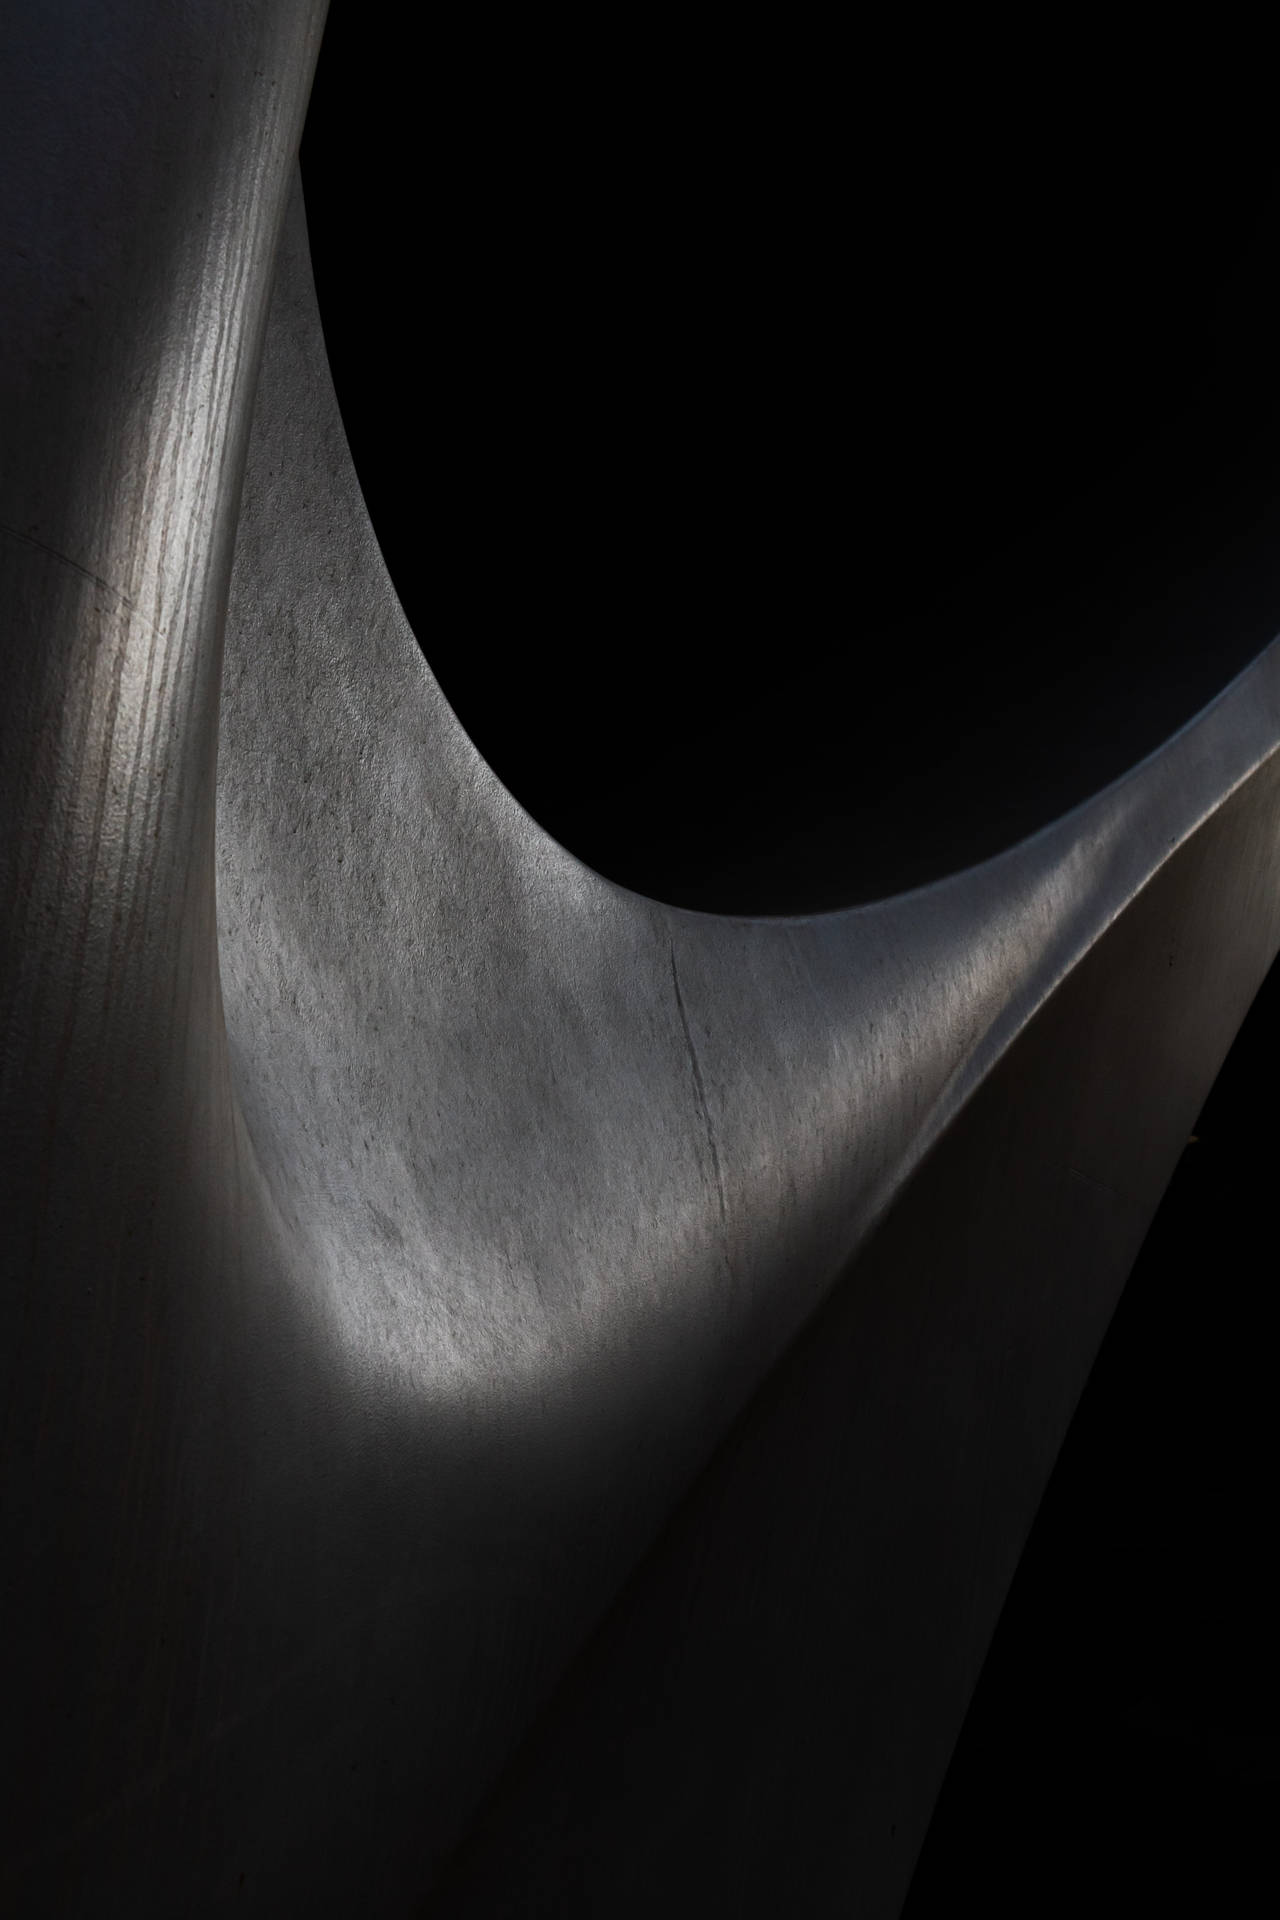 Abstract Black Sculpture in a Dimly Lit Room Wallpaper